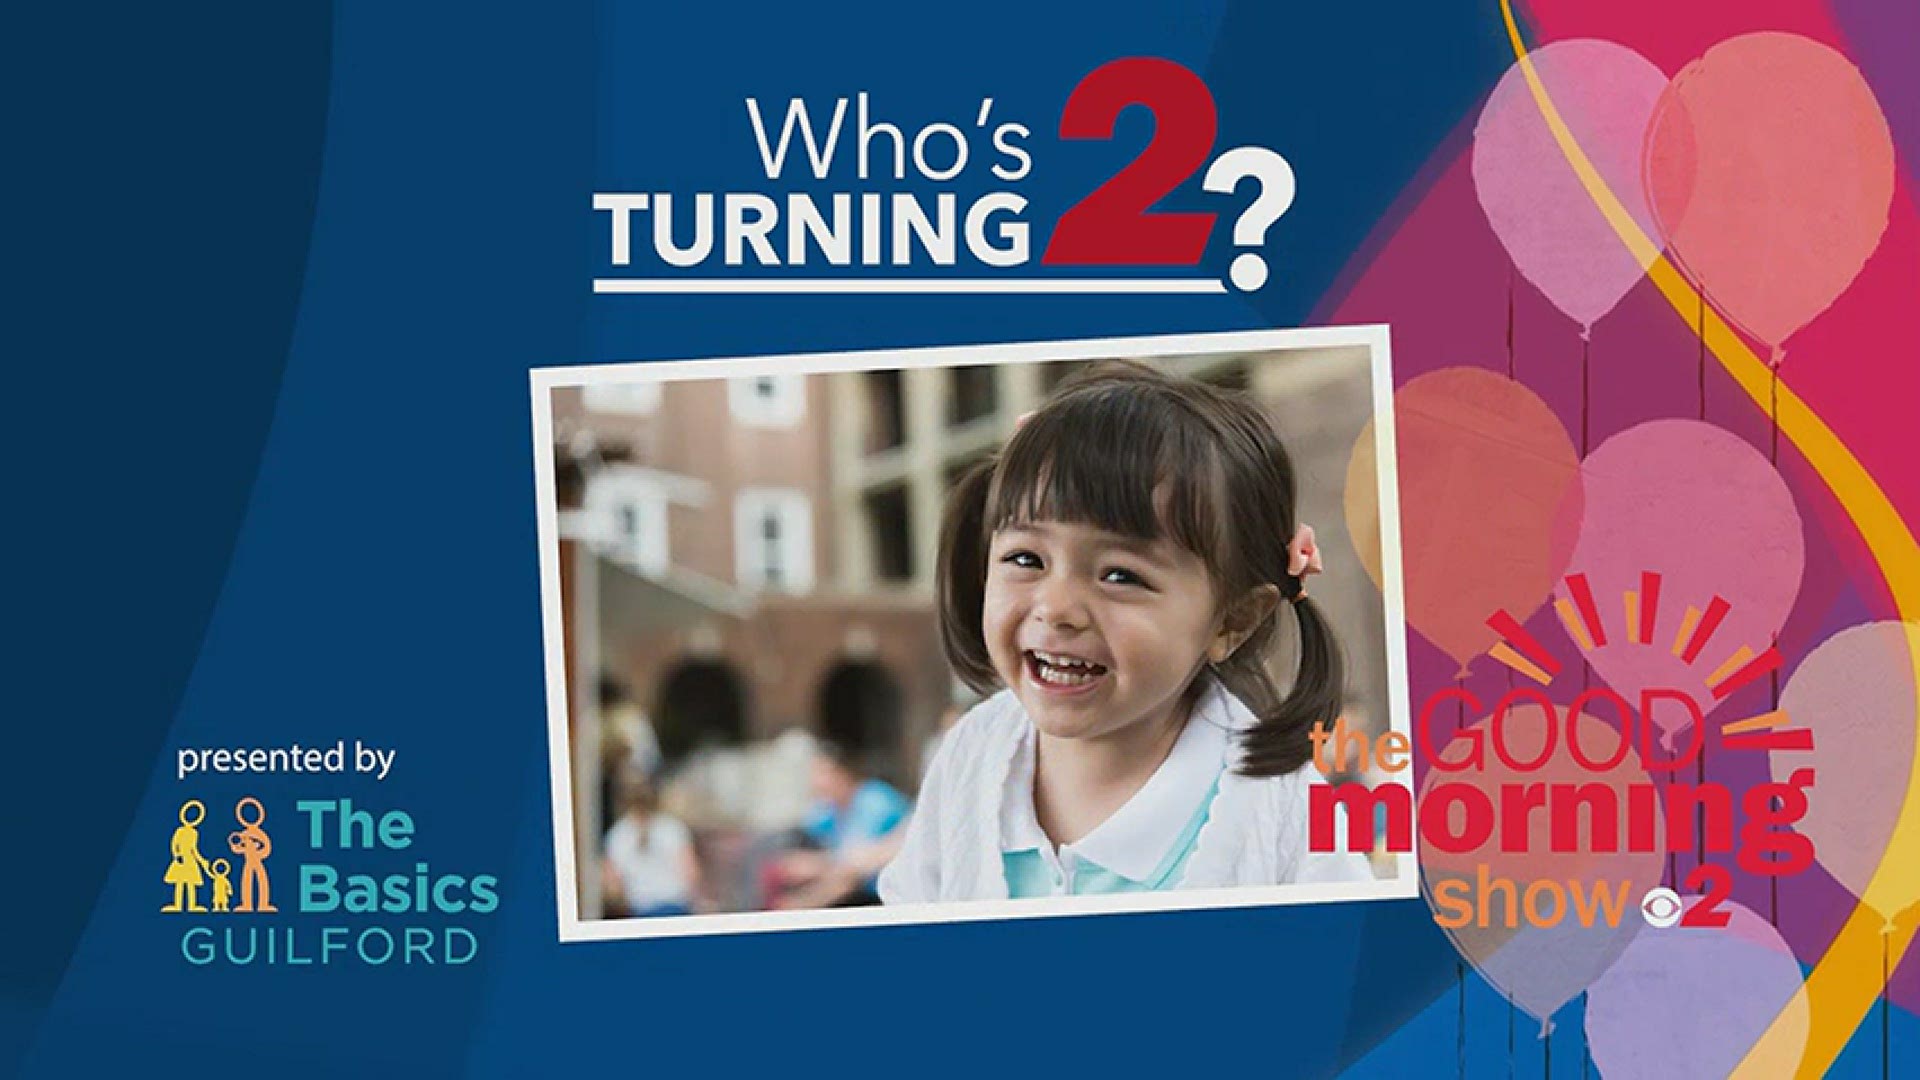 Is your child turning 2? Enter your child's photo for a chance to be on the Good Morning Show!